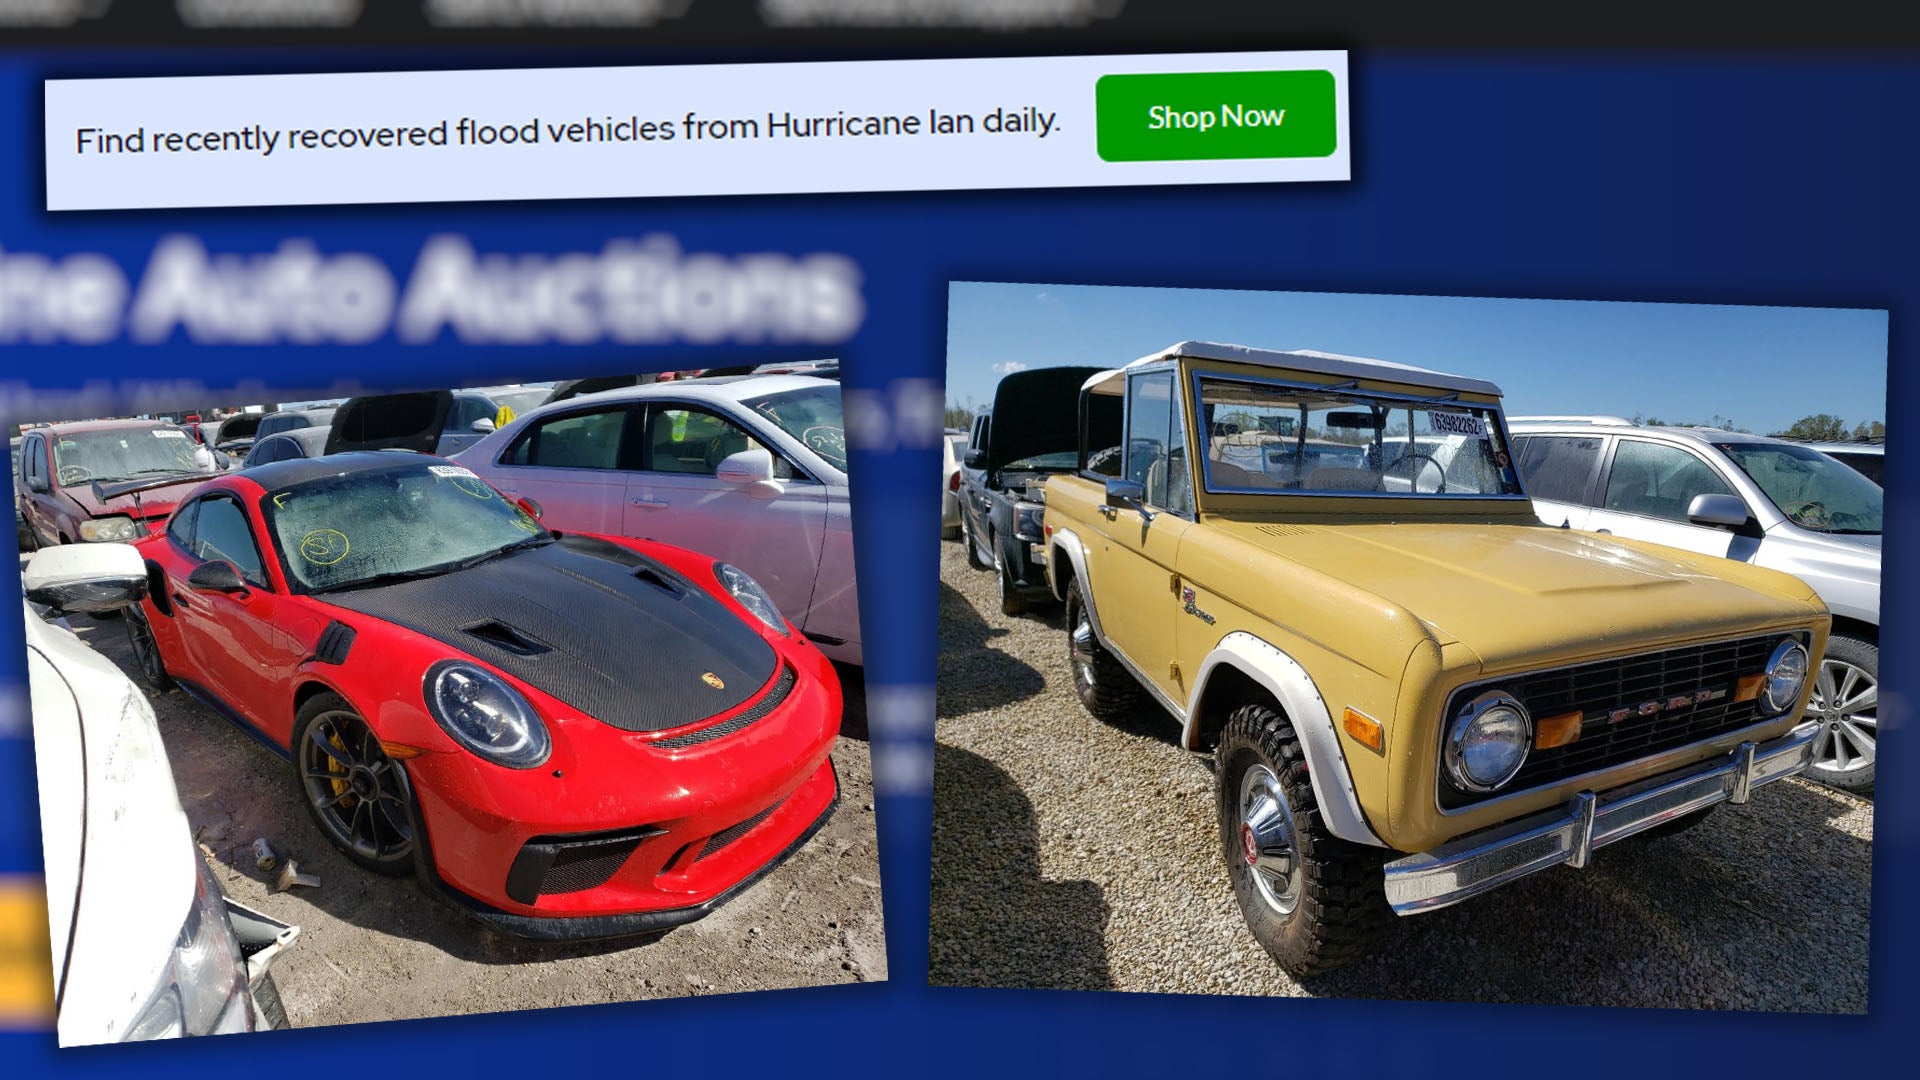 Hurricane Ian Destroyed Some Incredible Cars, and Thousands Are Now Available at Salvage Auctions